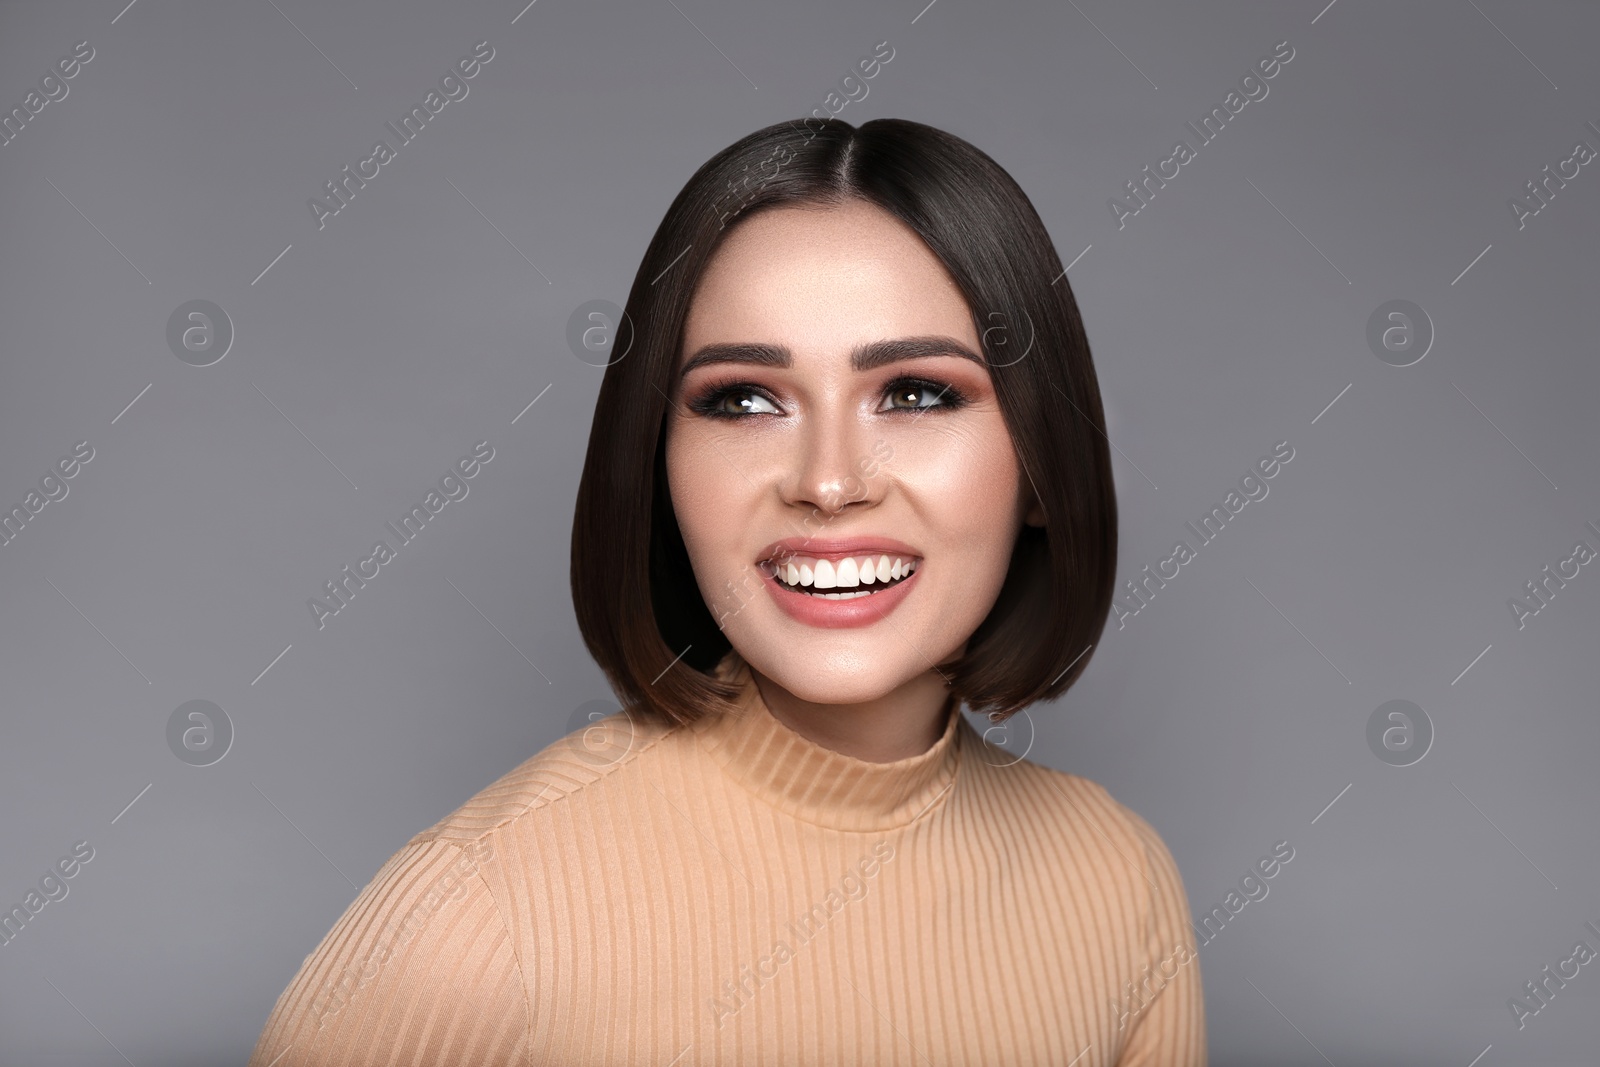 Image of Portrait of pretty young woman with brown hair smiling on grey background